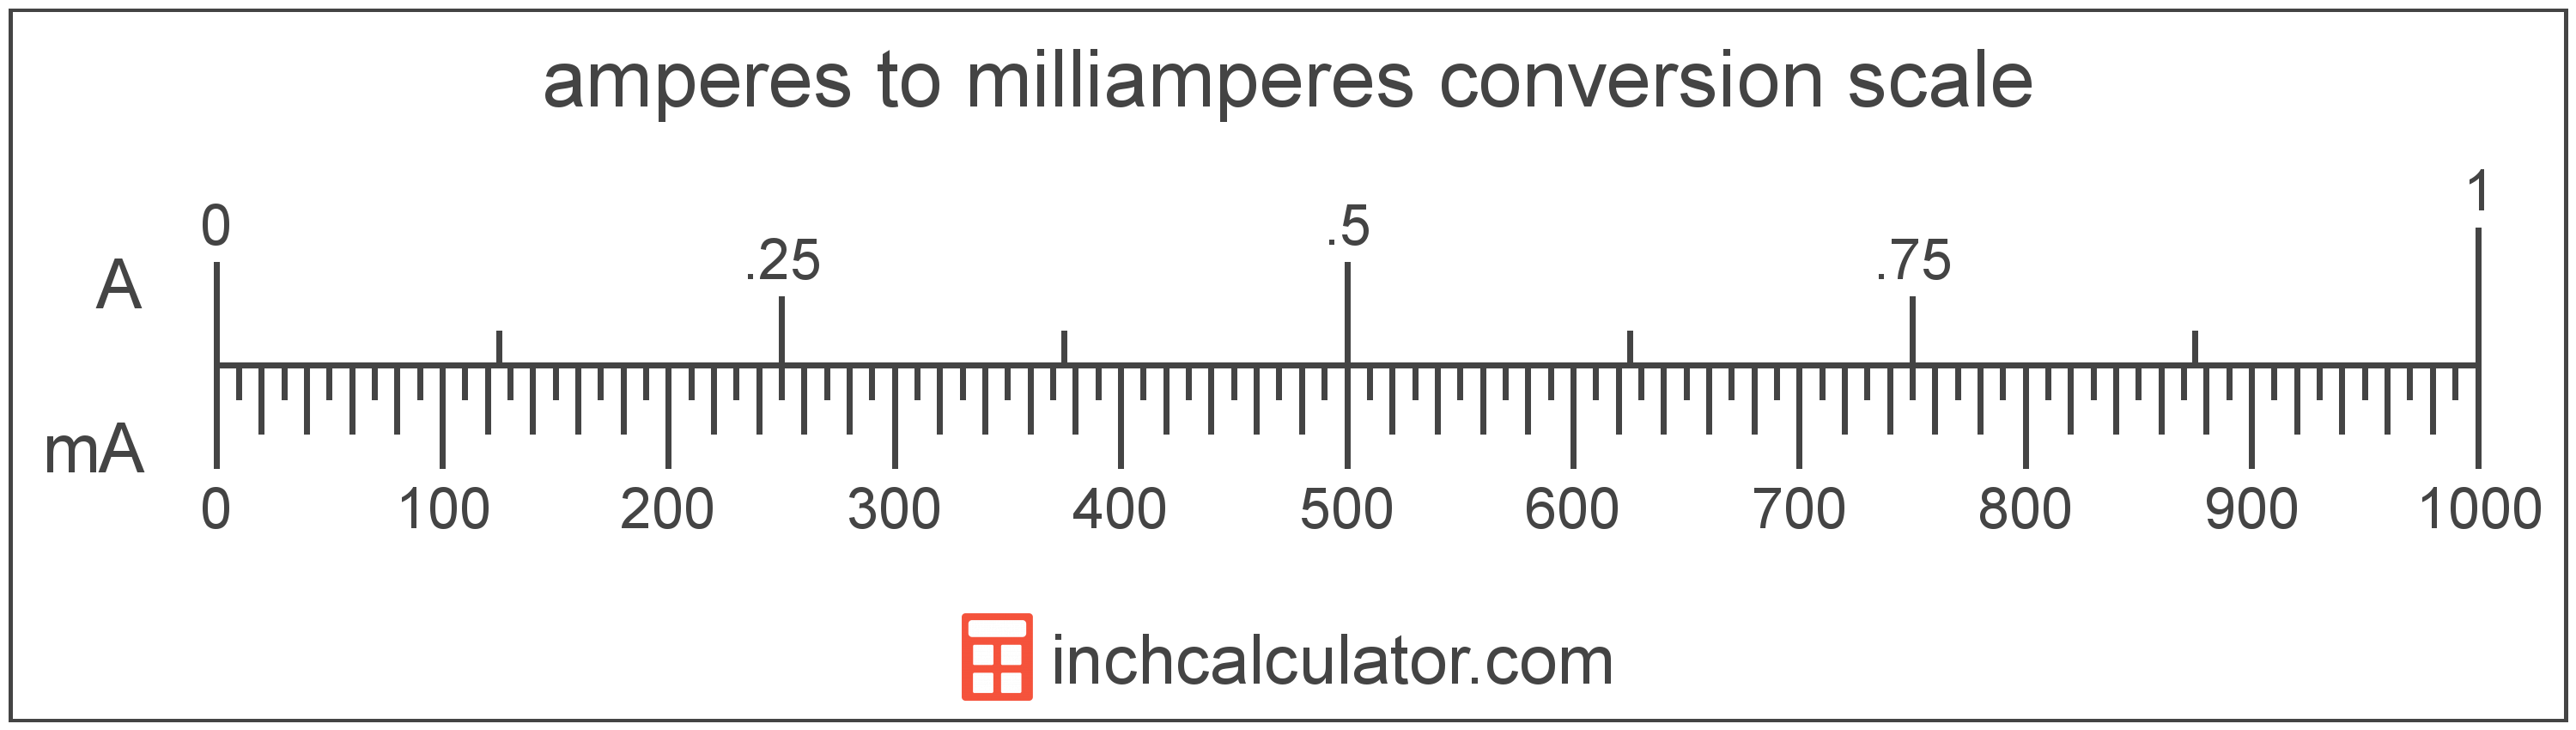 conversion scale showing milliamperes and equivalent amperes electric current values